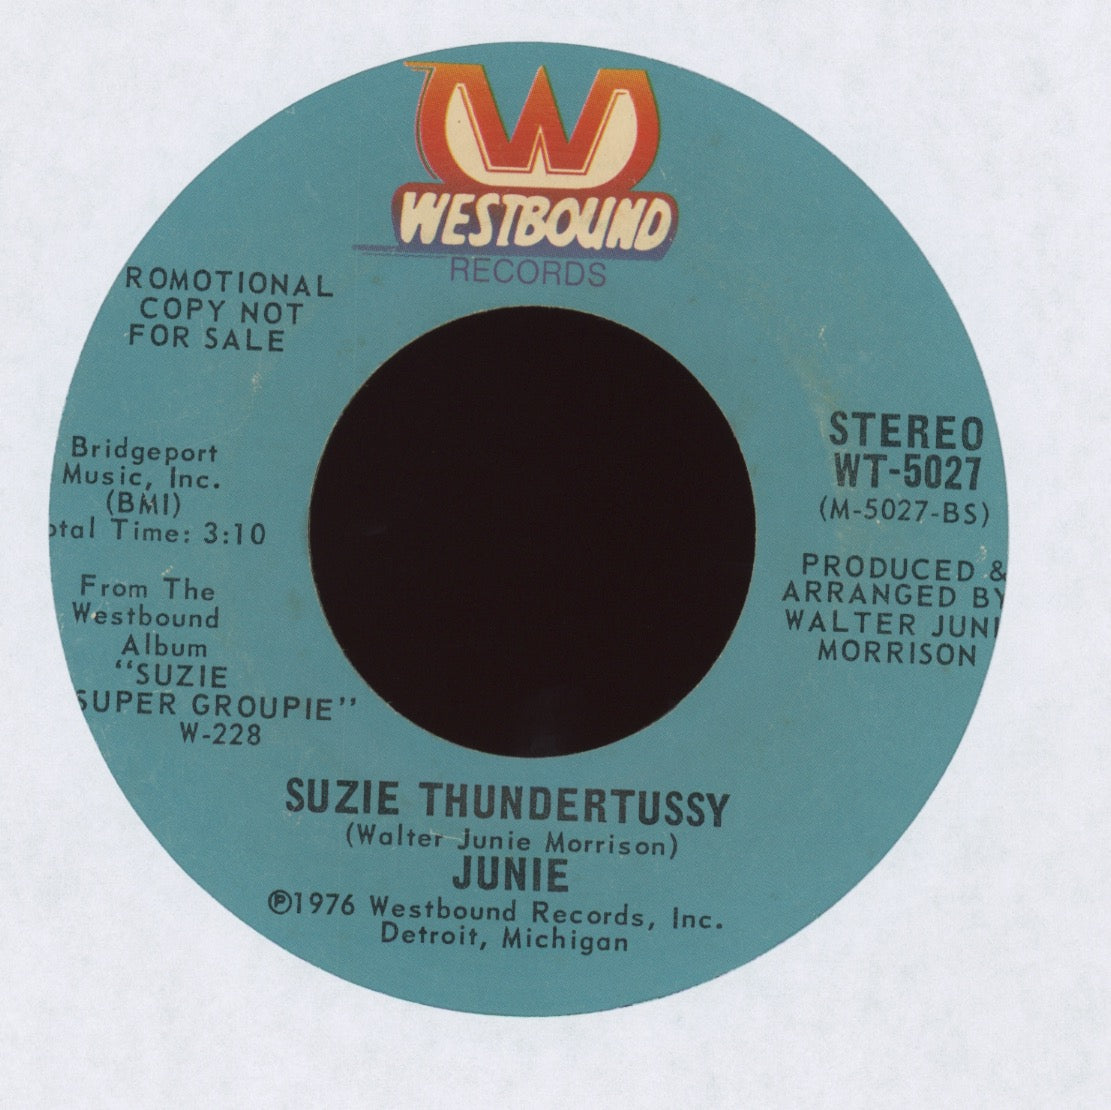 Junie Morrison - If You Love Him on Westbound Promo